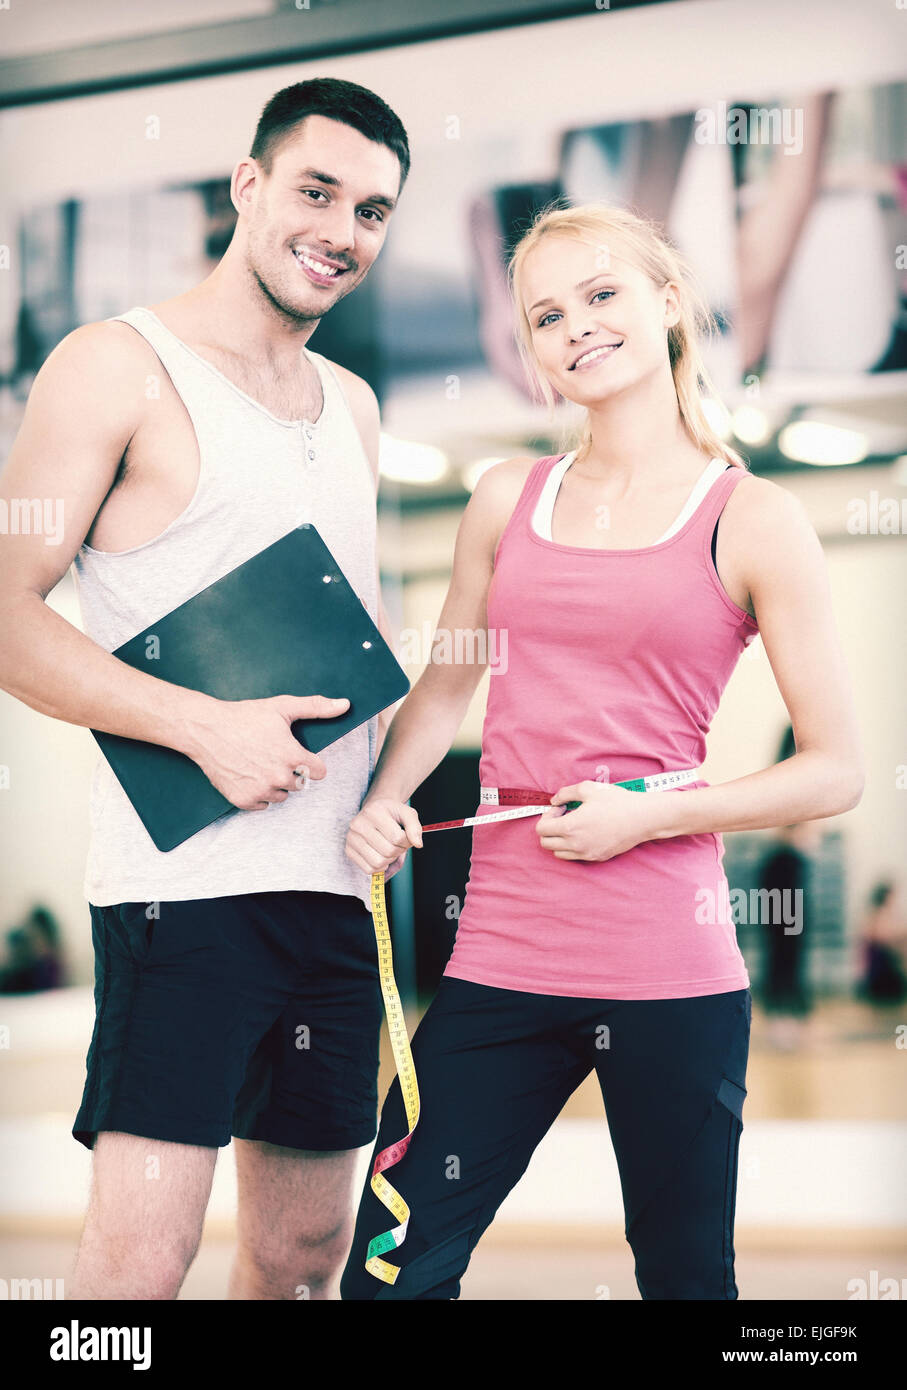 two smiling people with clipboard and measure tape Stock Photo